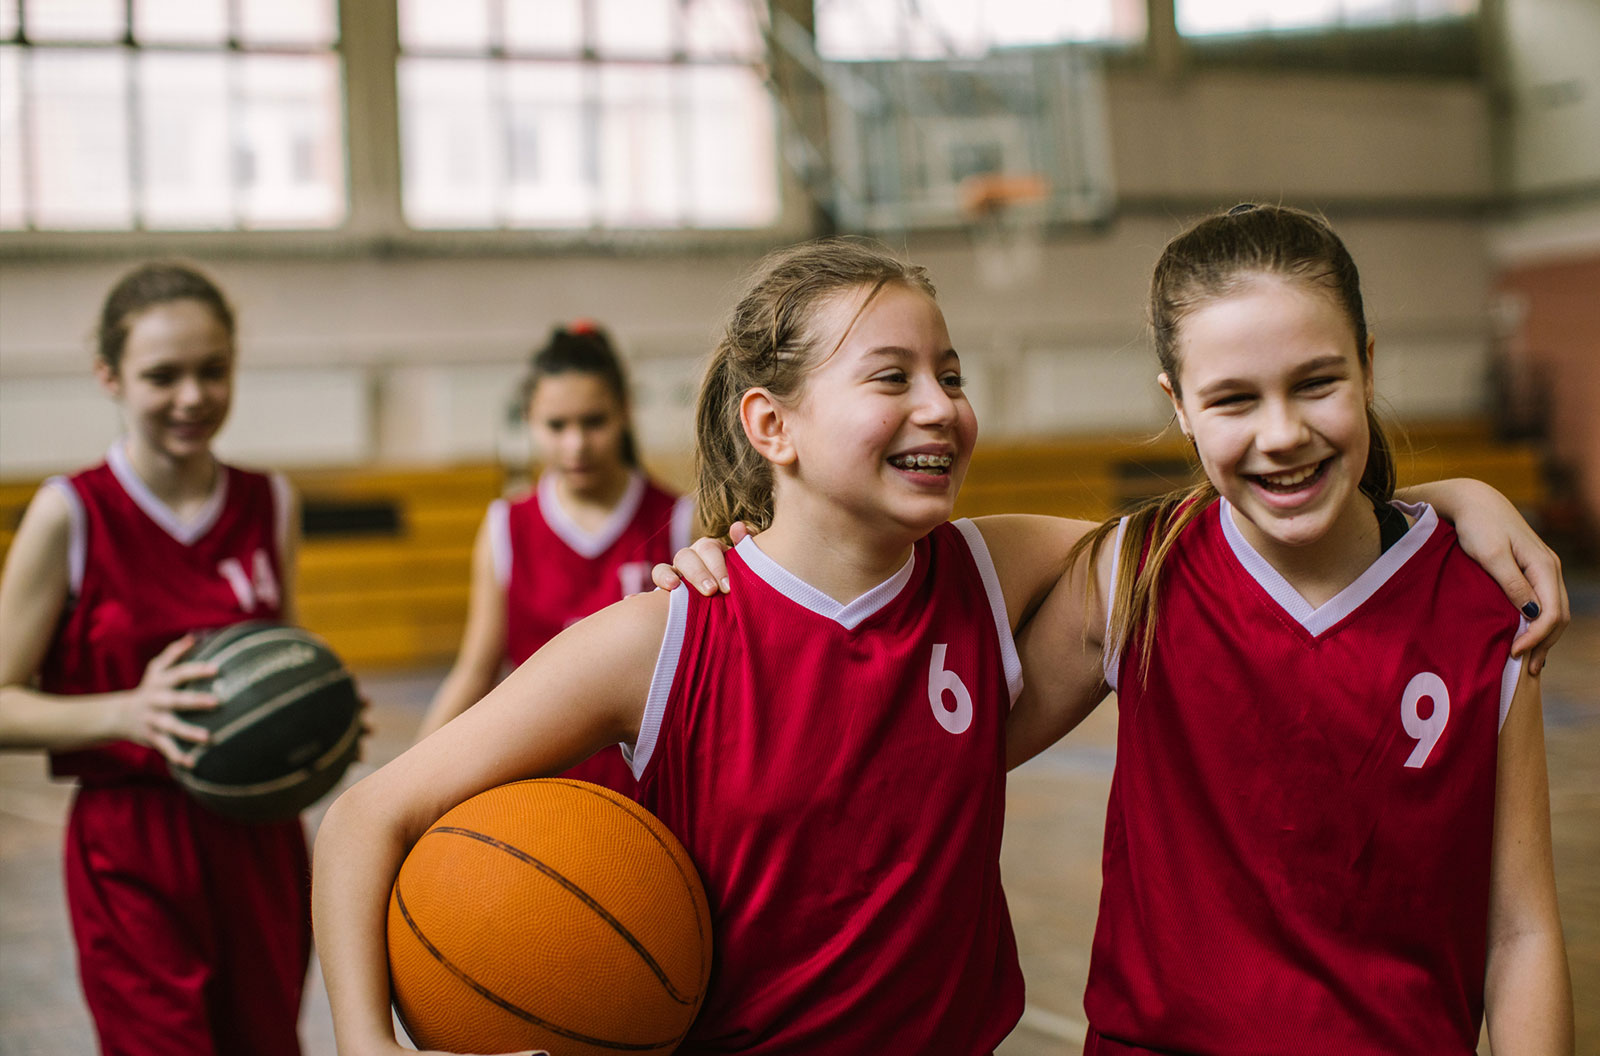 Four girls posing for a photo after a basketball game